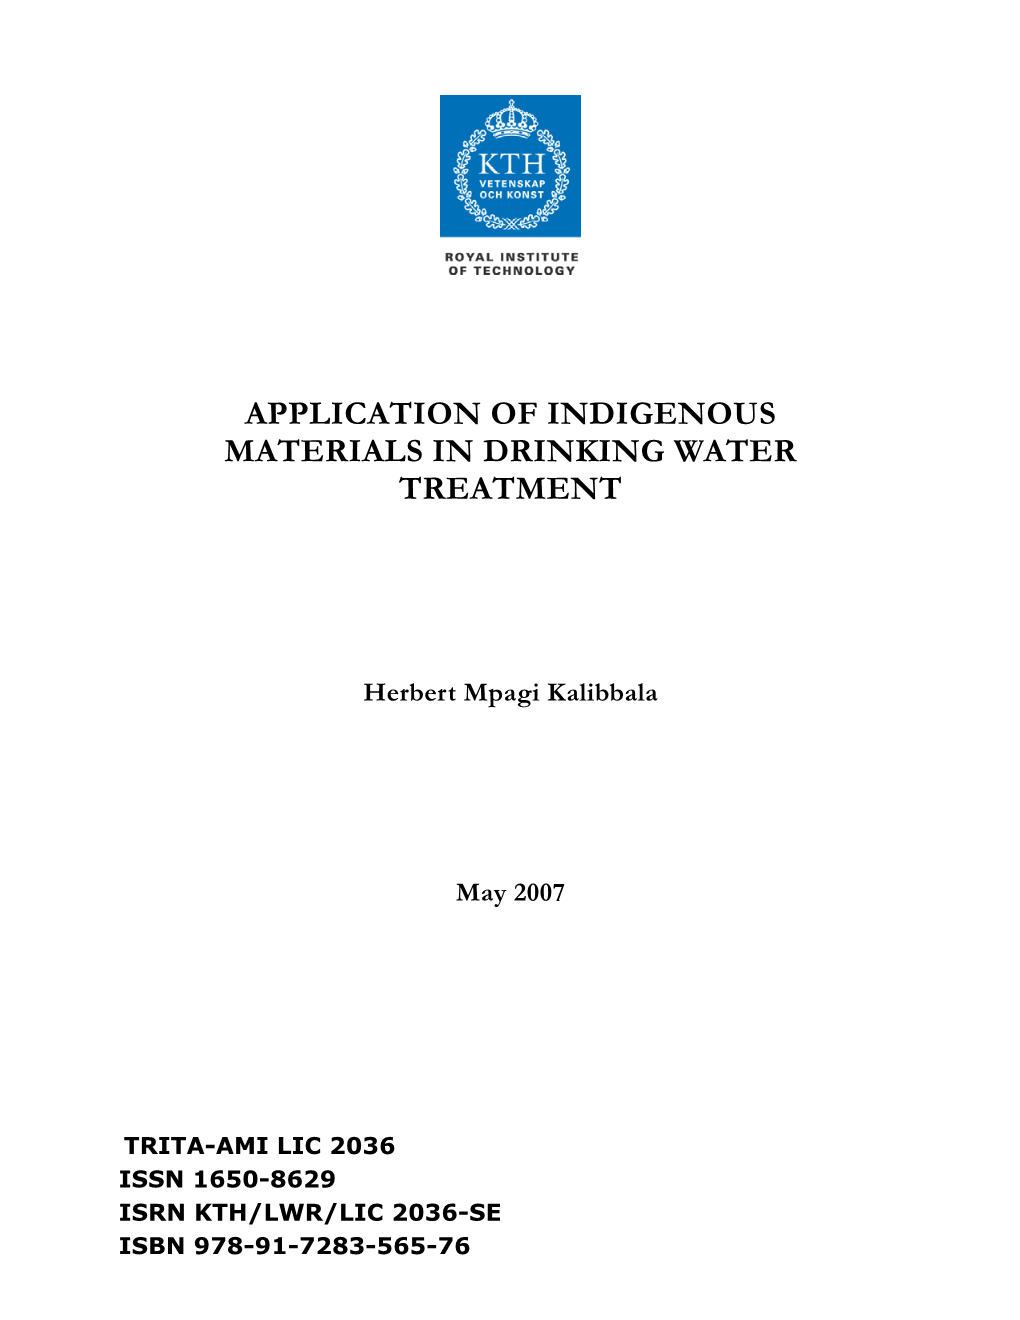 Application of Indigenous Materials in Drinking Water Treatment